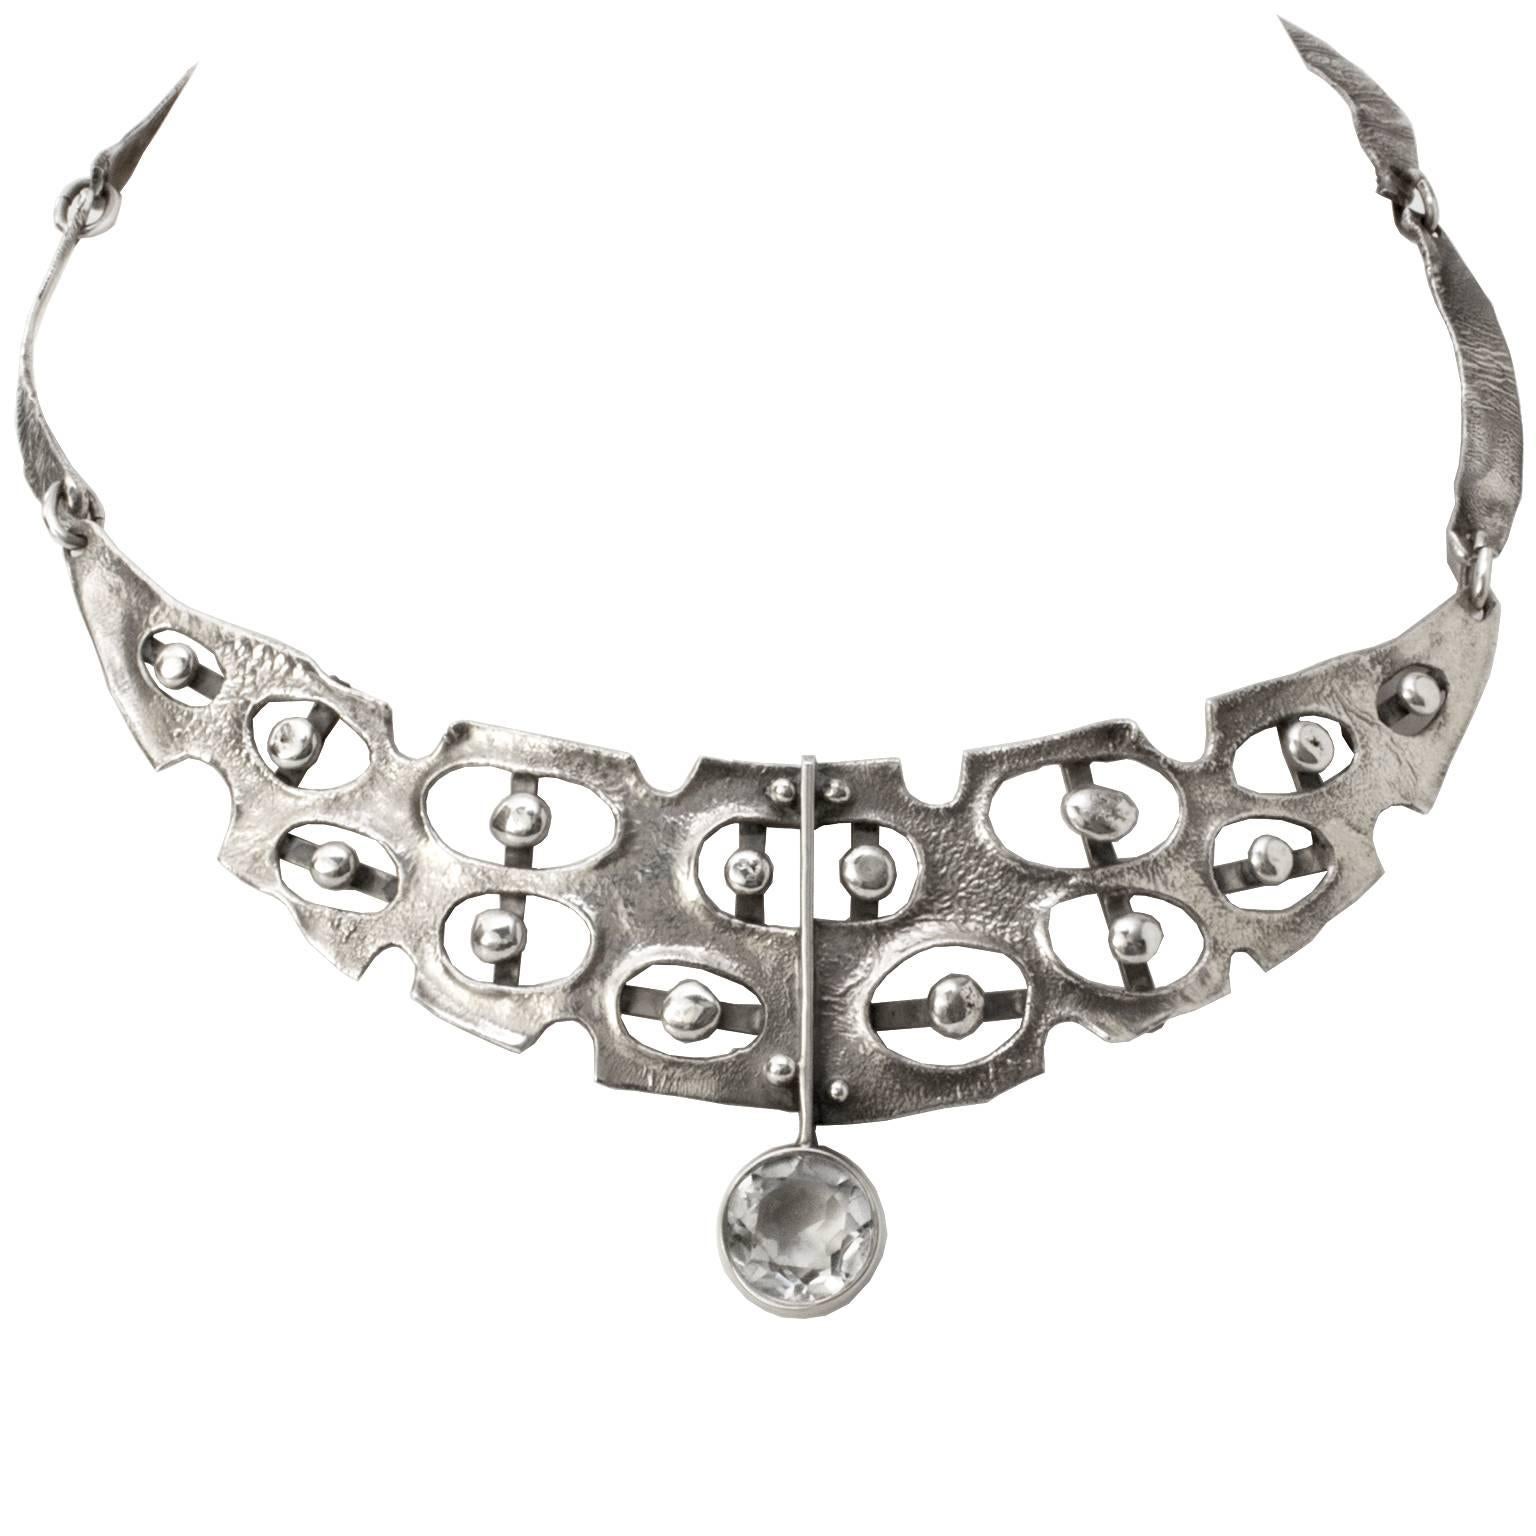 Scandinavian Modern Sterling Silver Necklace by Issac Cohen, Stockholm